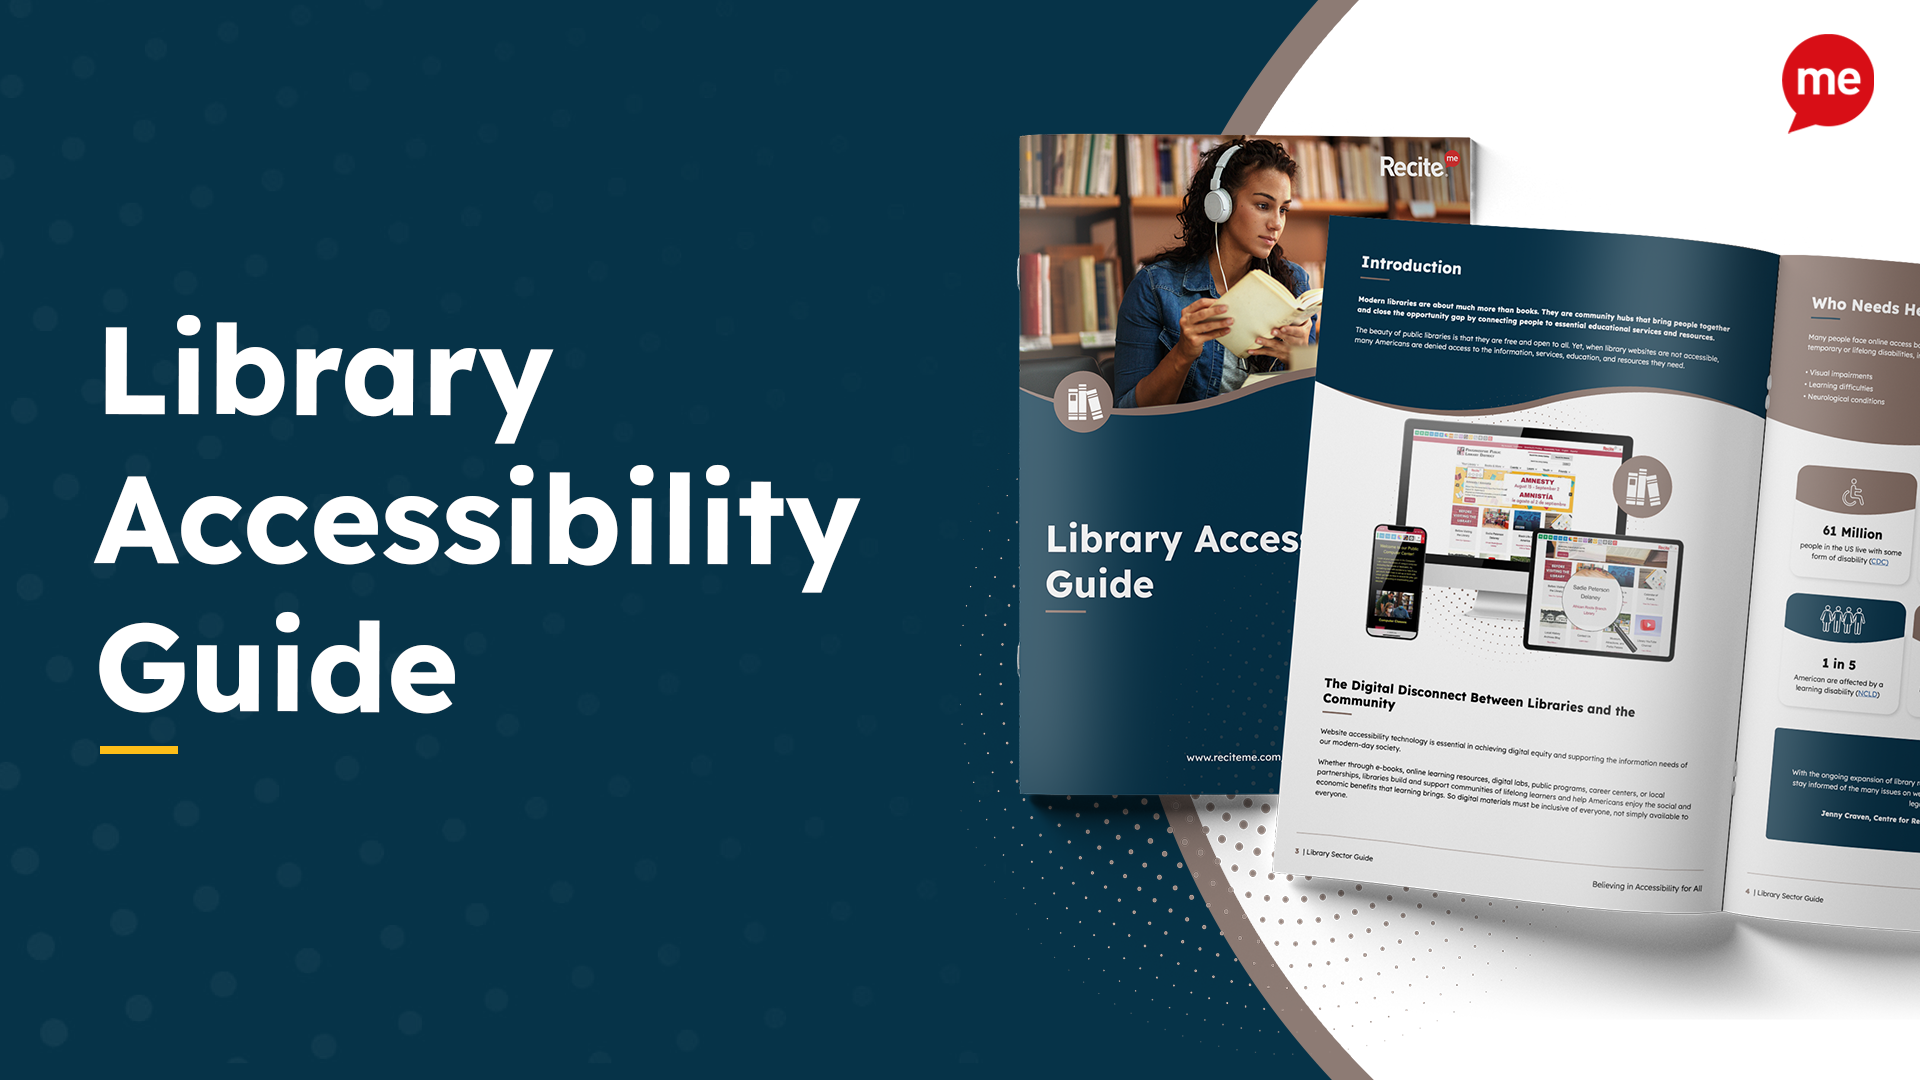 Recite Me Library Accessibility Mockup thumbnail image